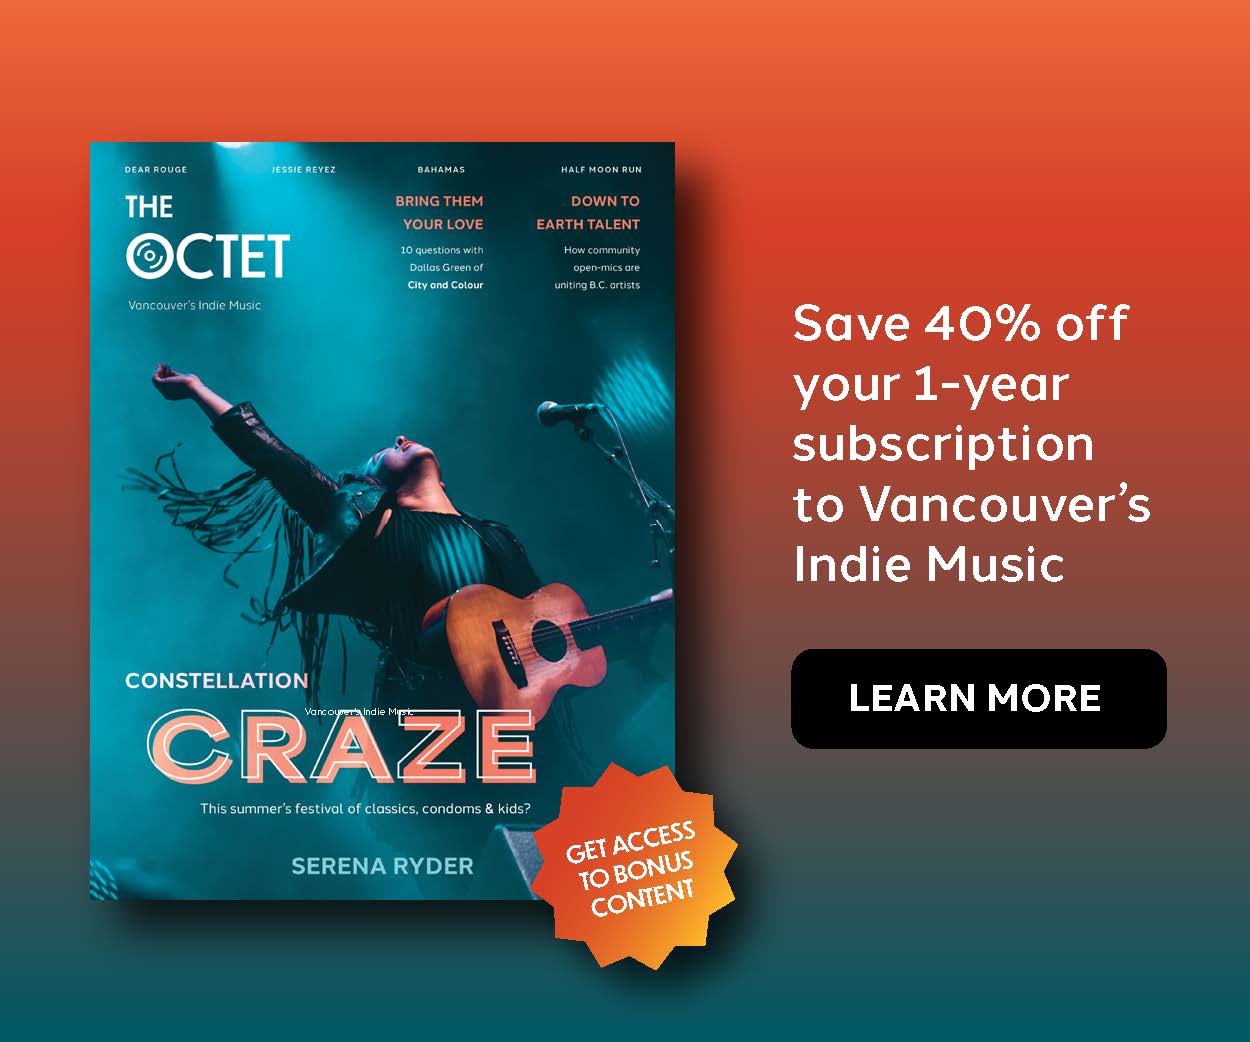 The magazine ad for The Octet.